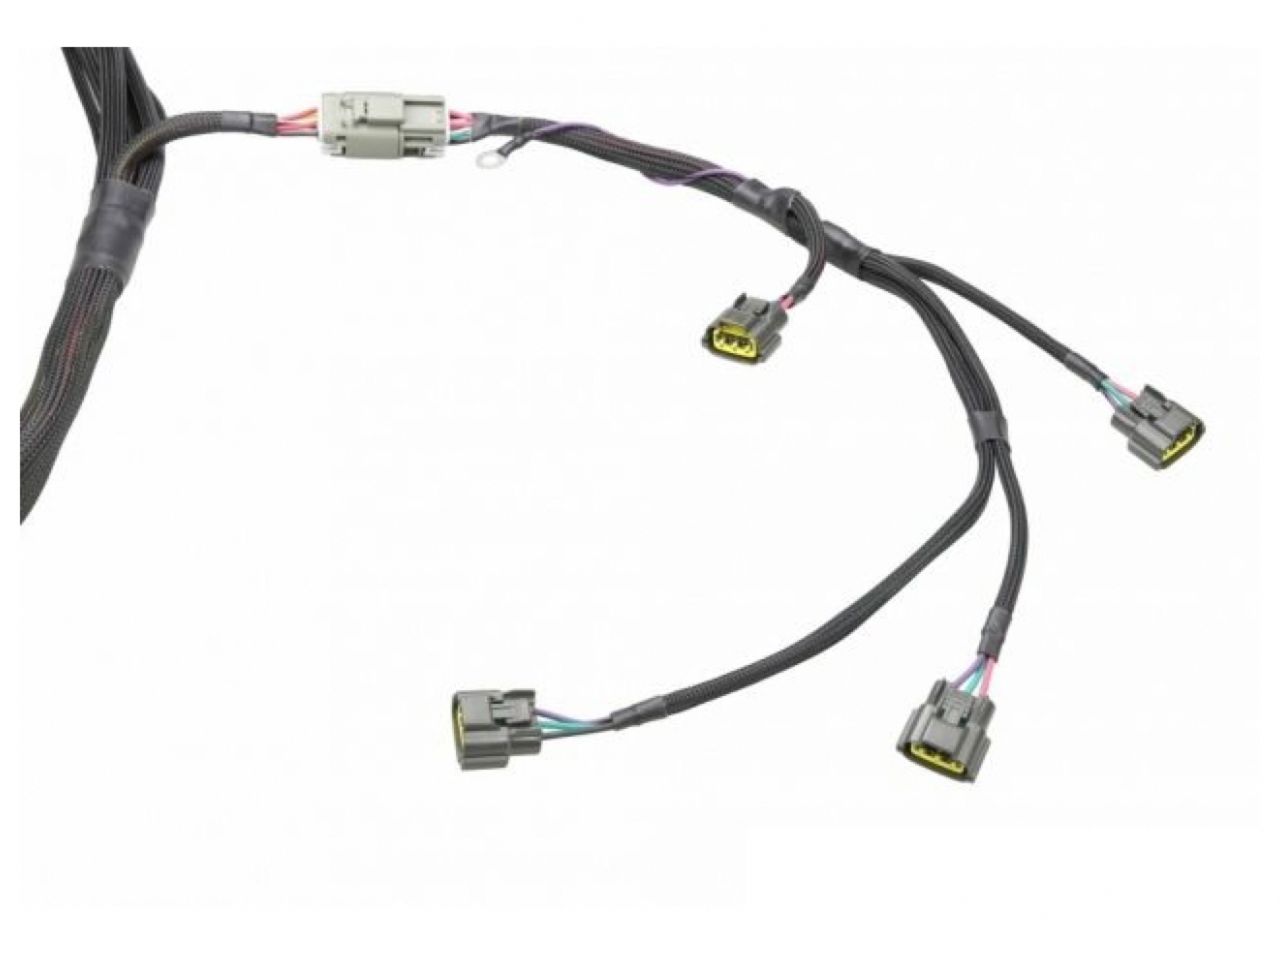 Wiring Specialties S14 SR20DET Wiring Harness for Datsun 510 - PRO SERIES